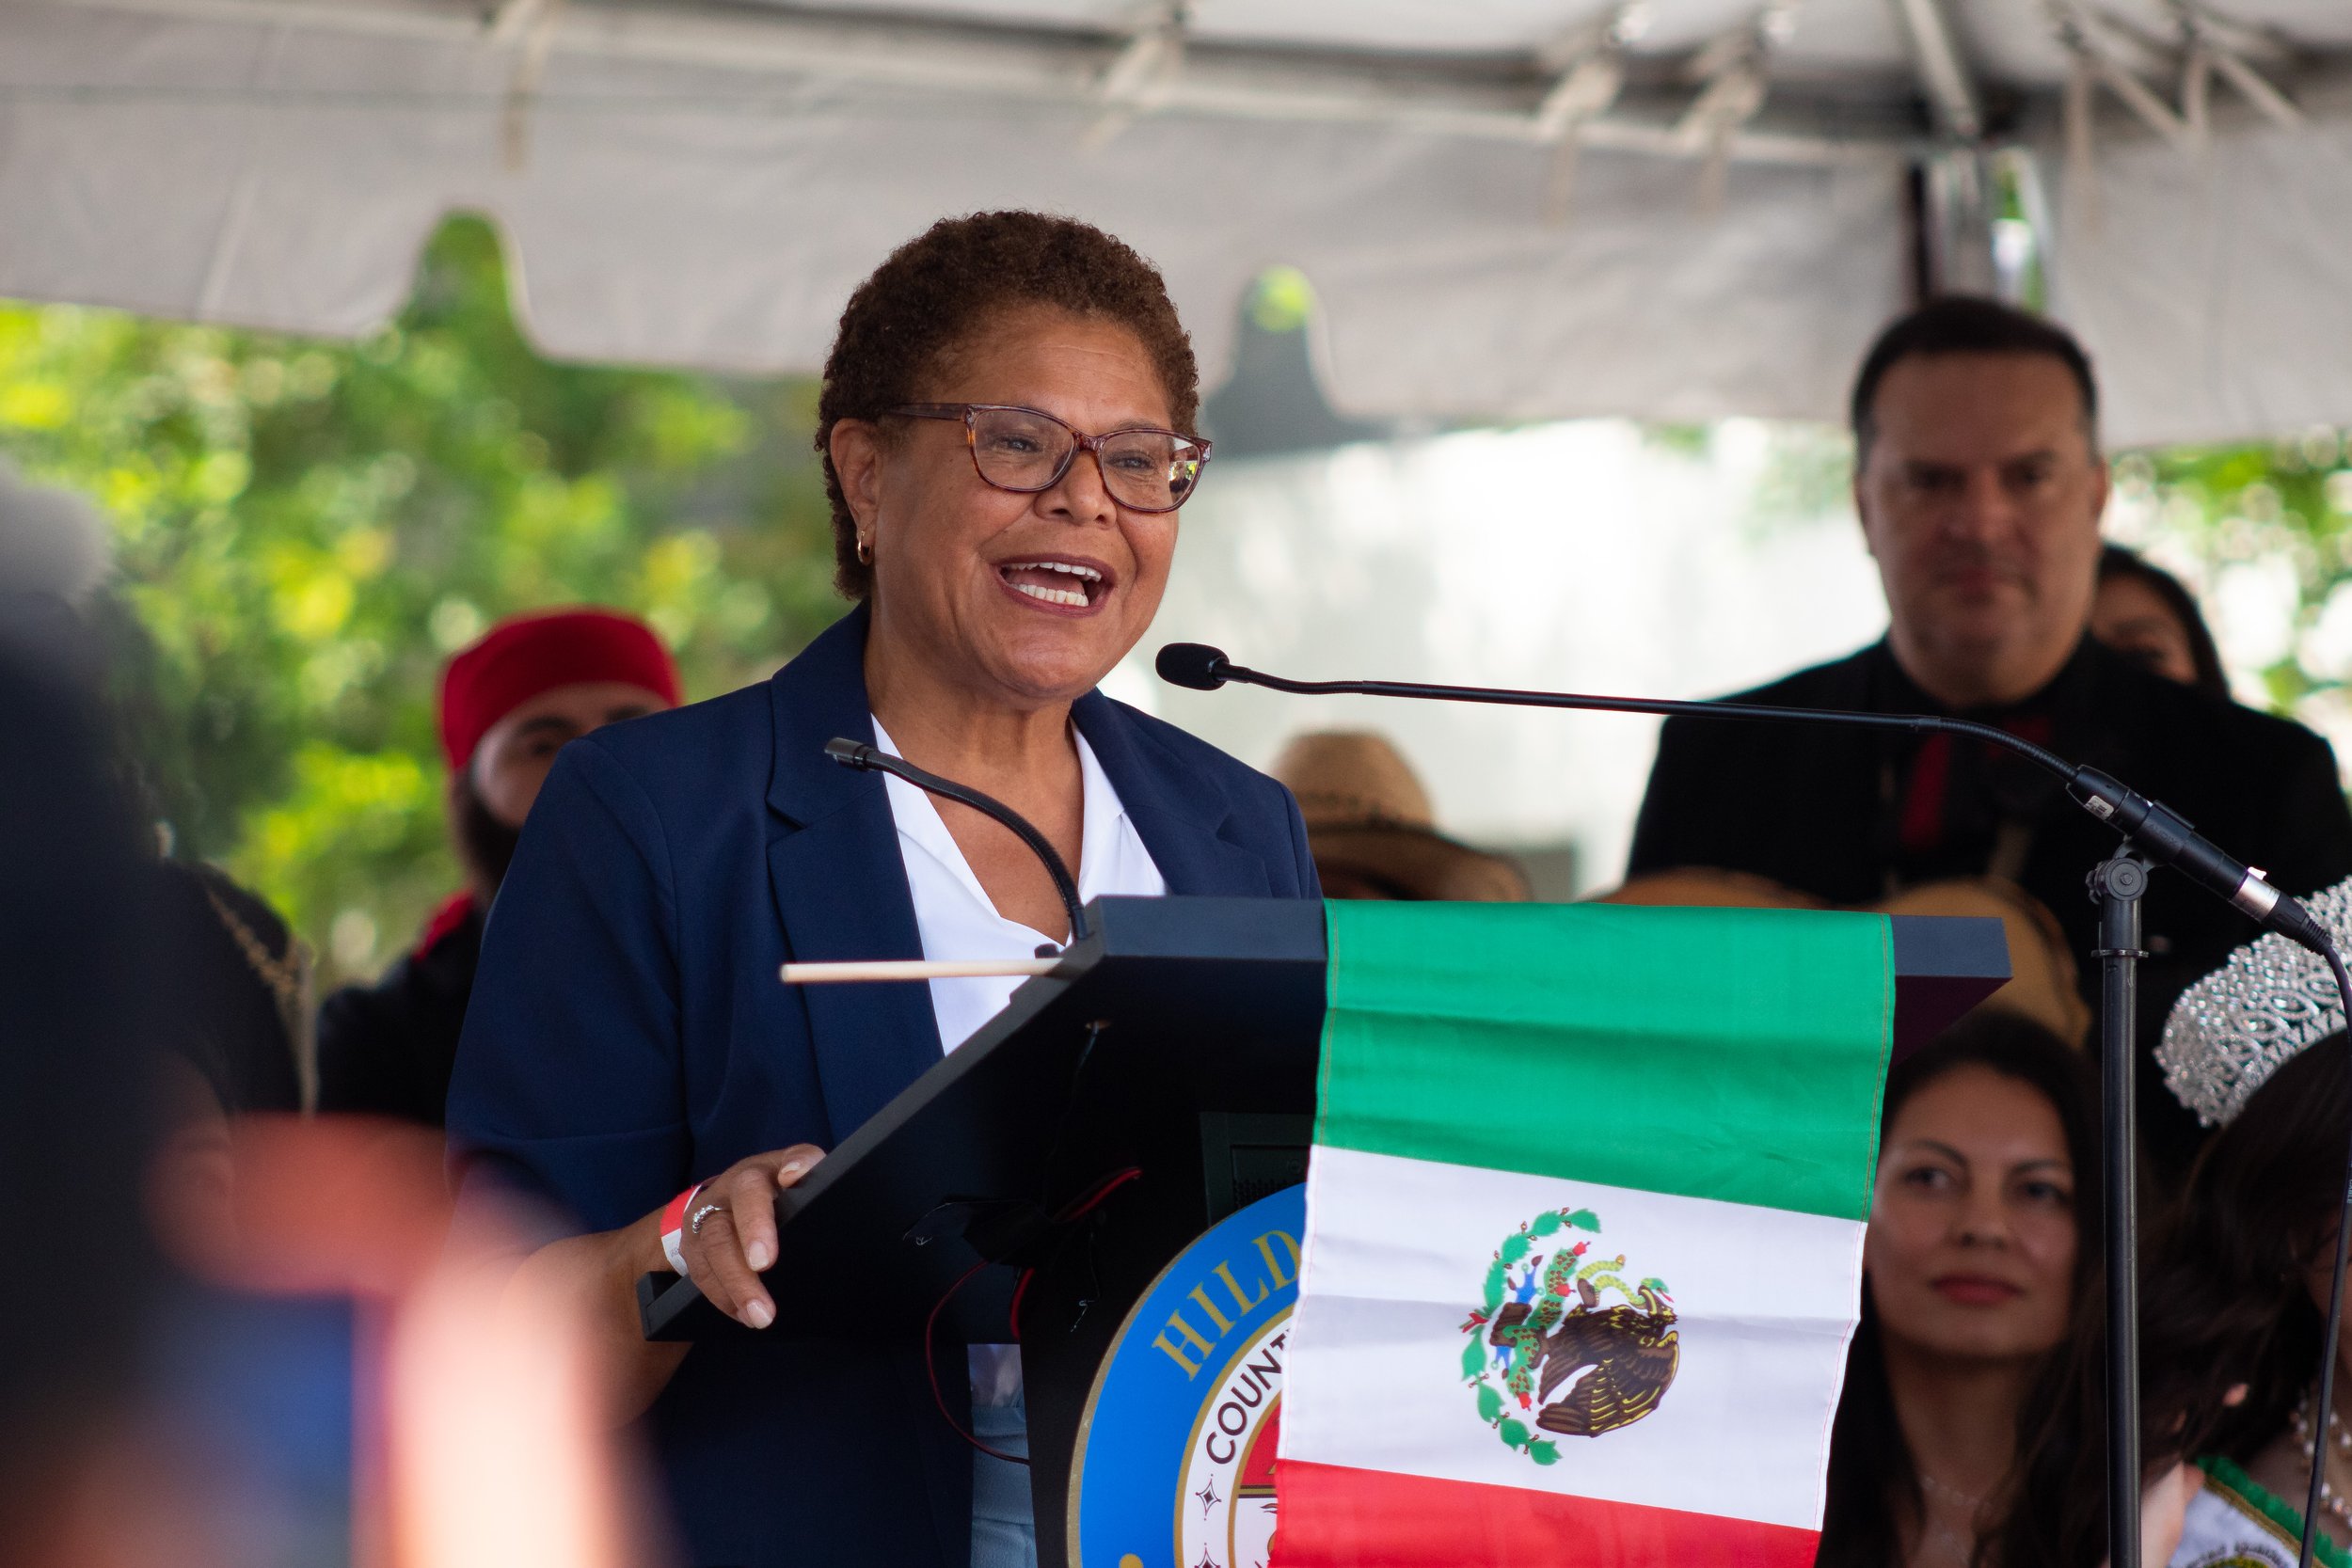  Los Angeles mayoral candidate Karen Bass speaking before the Mexican Independence Day Parade & Festival in East Los Angeles, Calif. on Sept. 18, 2022. (Caylo Seals | The Corsair) 